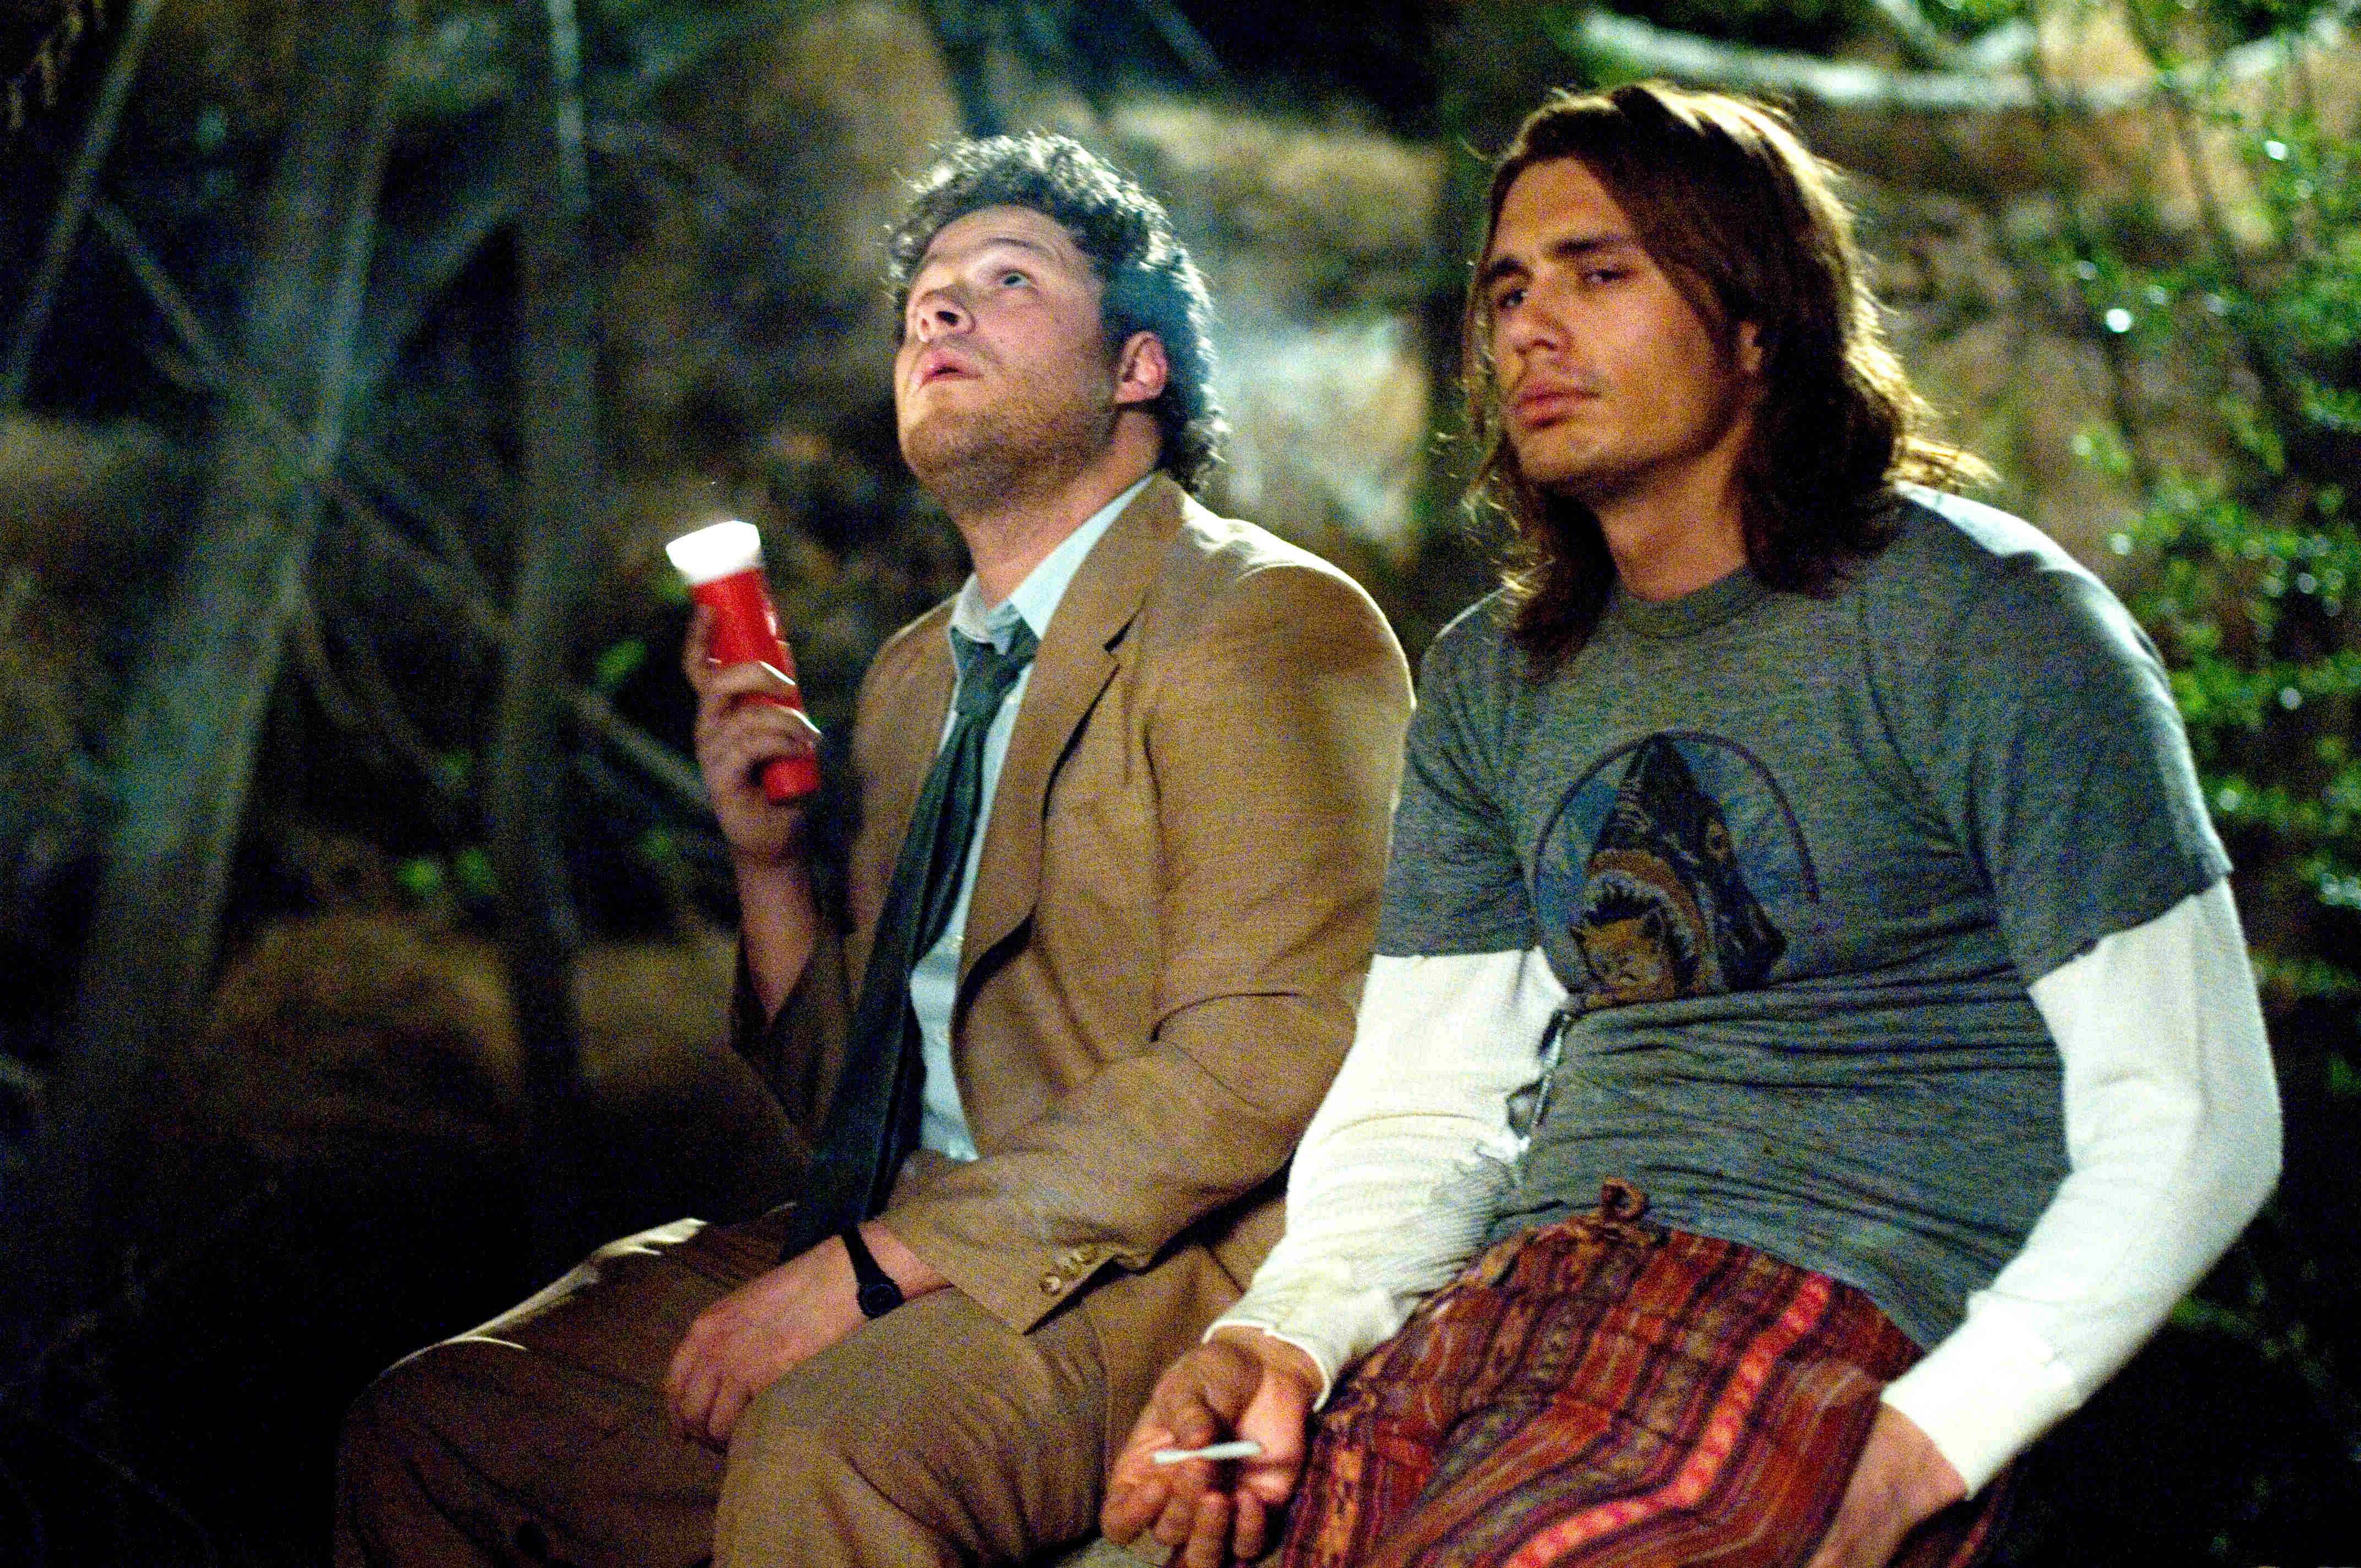 Seth Rogen stars as Dale Denton and James Franco stars as Saul Silver in Columbia Pictures' Pineapple Express (2008)